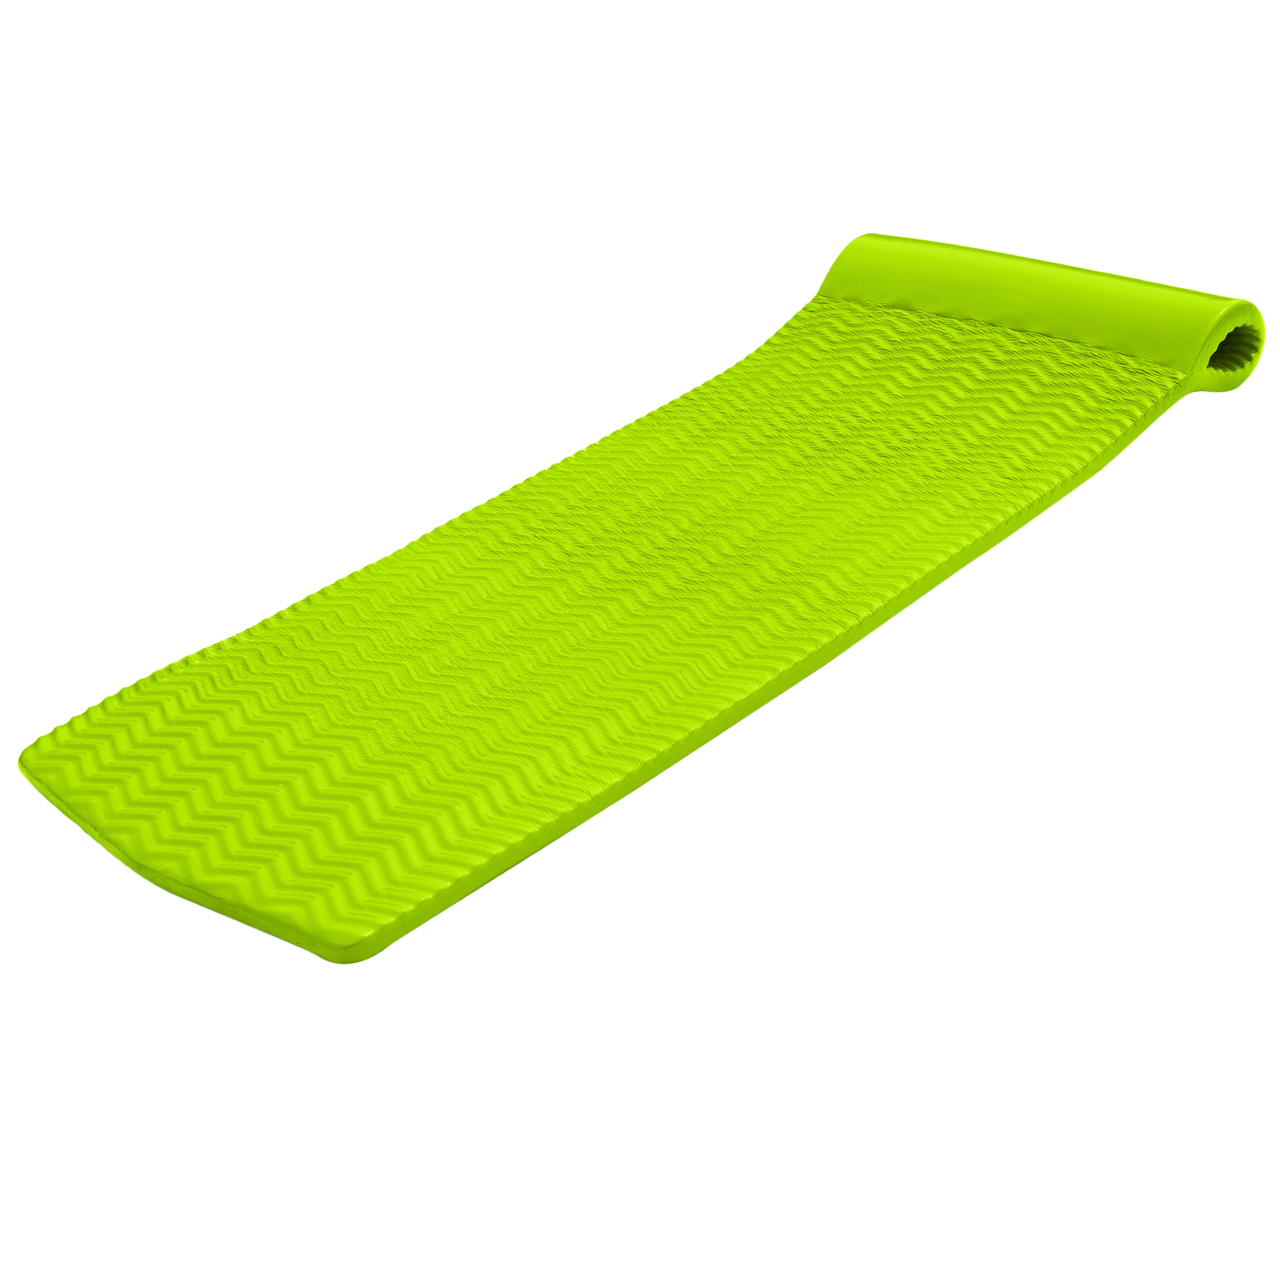 Softie Serenity Pool Float Lime Green